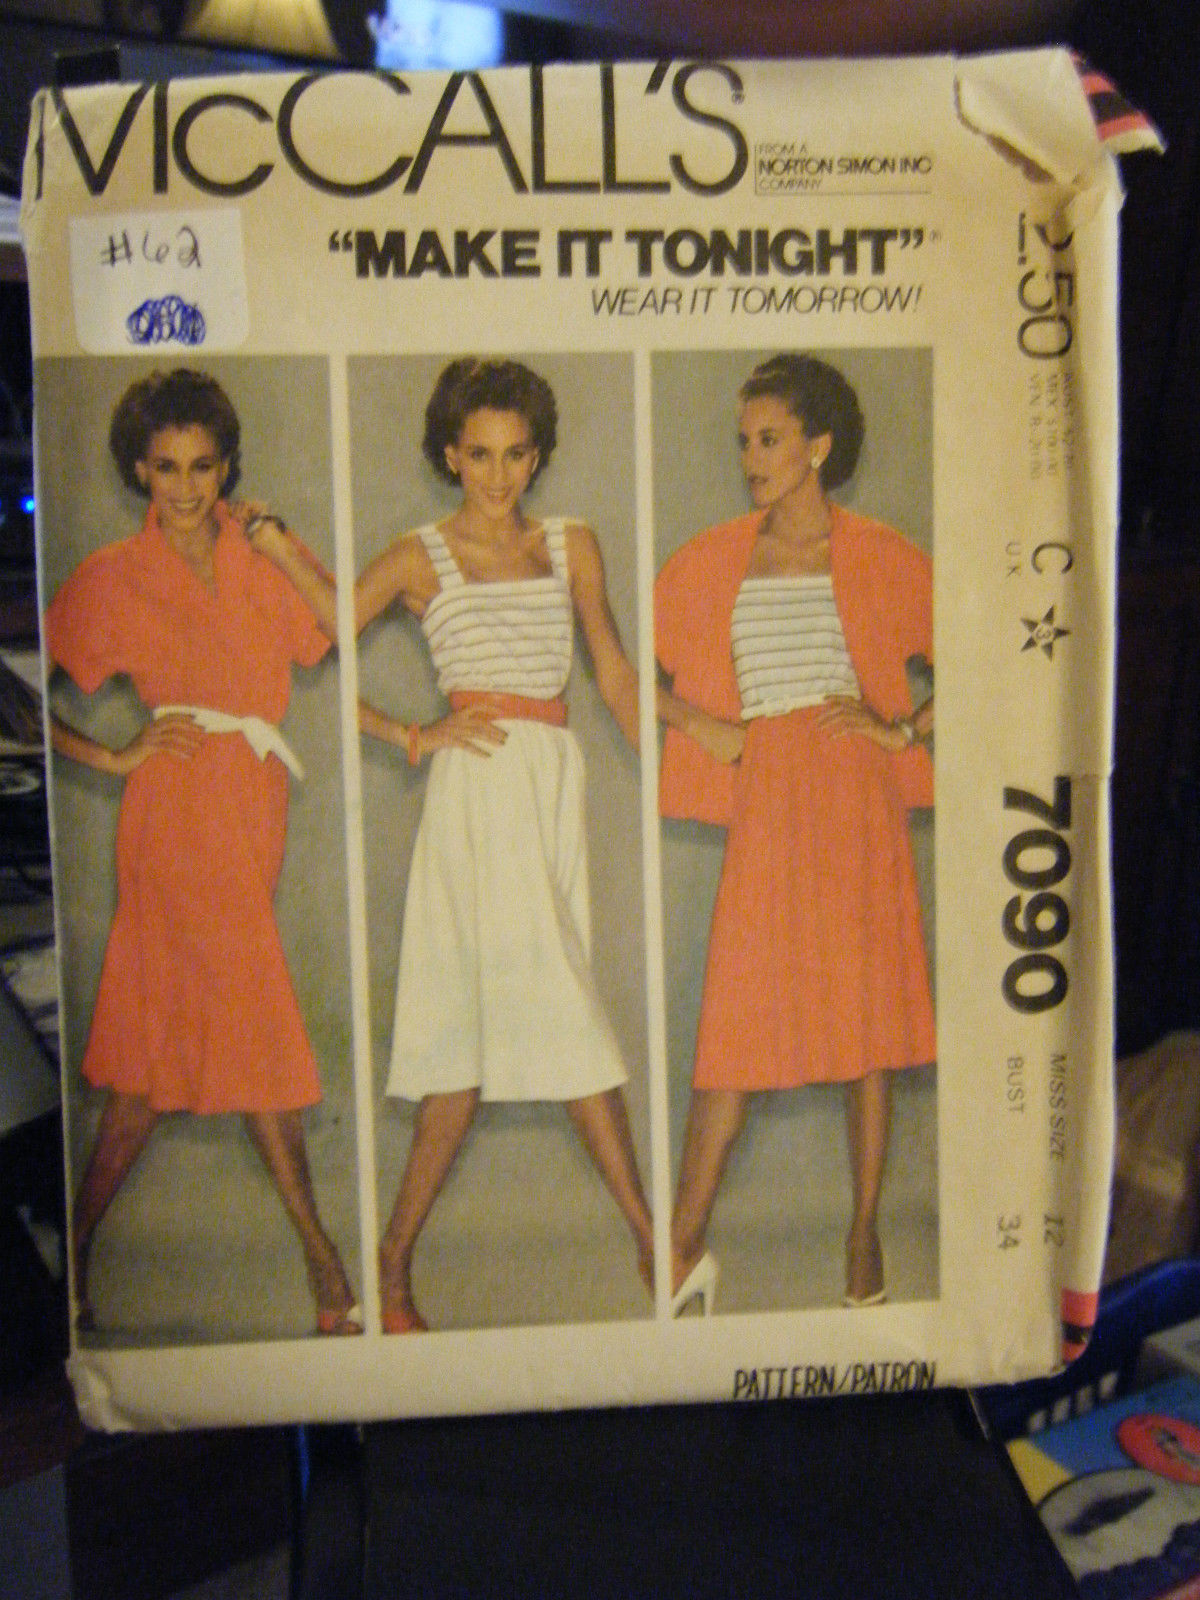 Primary image for Vintage McCall's 7090 Misses Top, Camisole & Skirt Pattern - Size 12 Bust 34